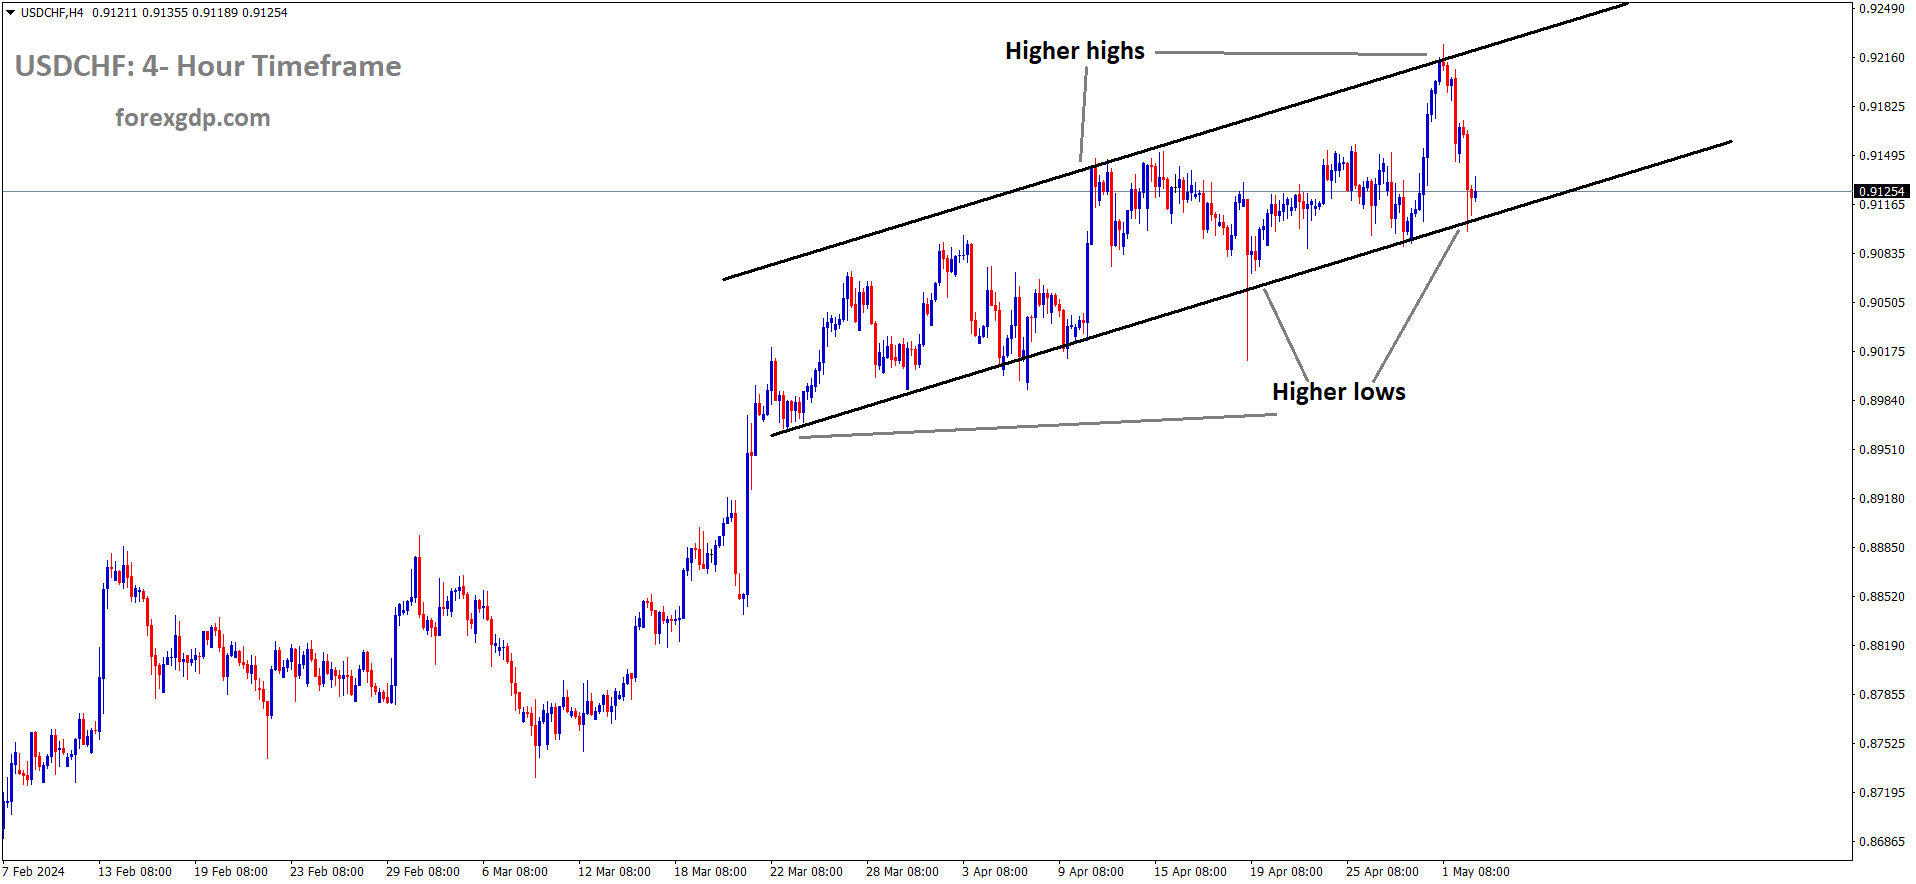 USDCHF is moving in Ascending channel and market has reached higher low area of the channel